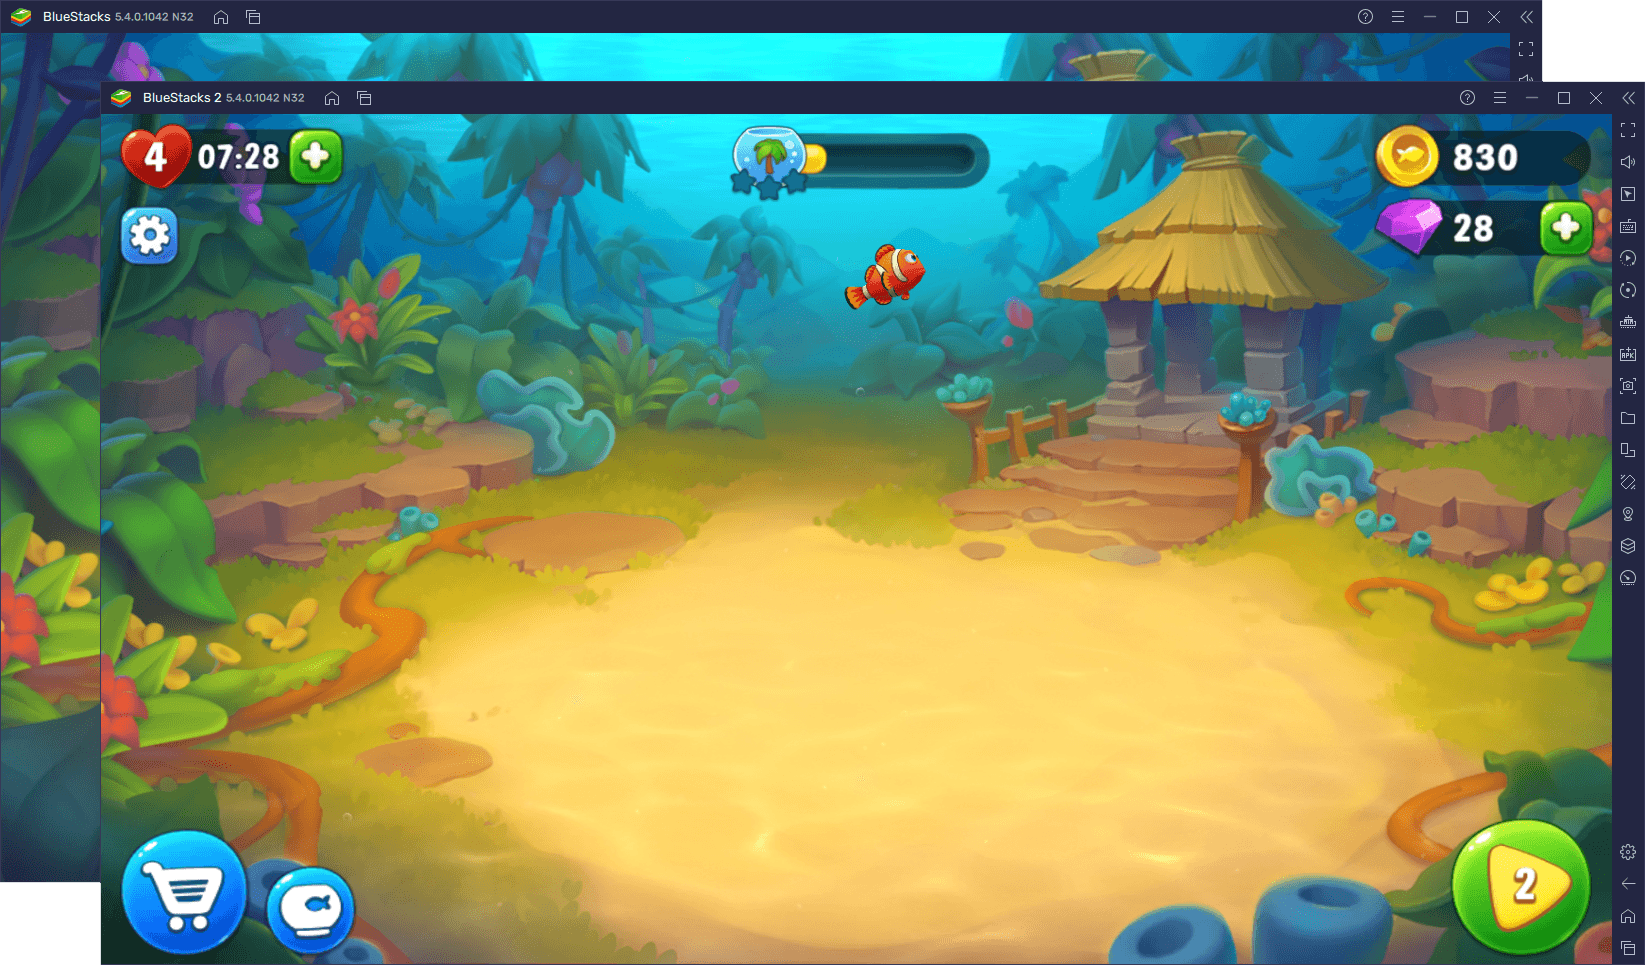 Fishdom on PC - How to Play With Infinite Lives, the Best Graphics, and Other Gameplay Features